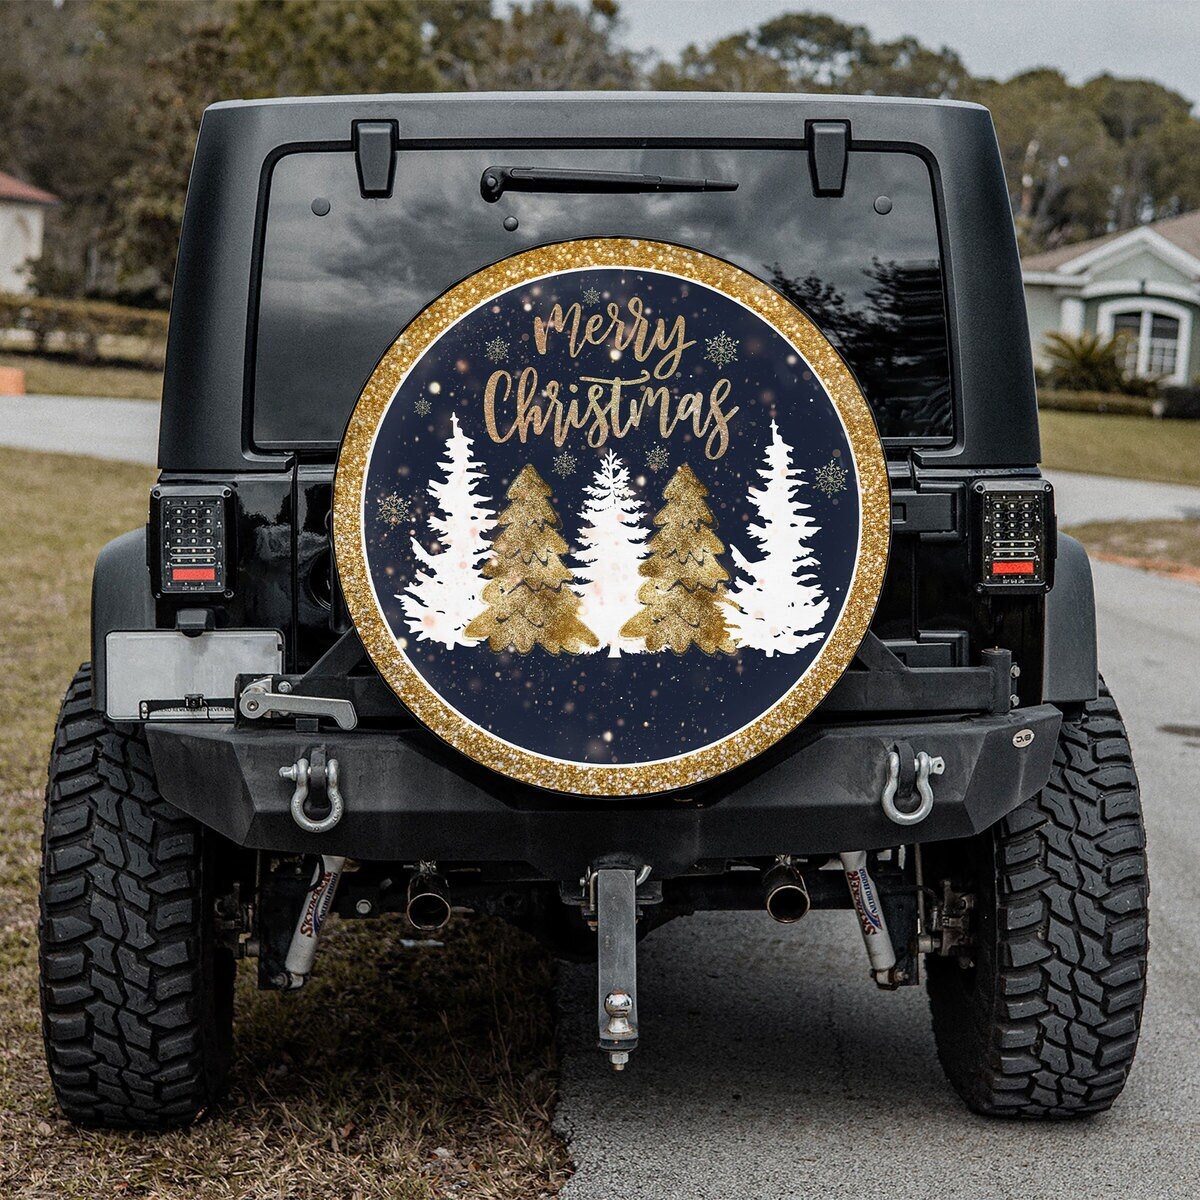 Discover Merry Christmas Spare Tire Cover, Christmas Tree Camper Truck